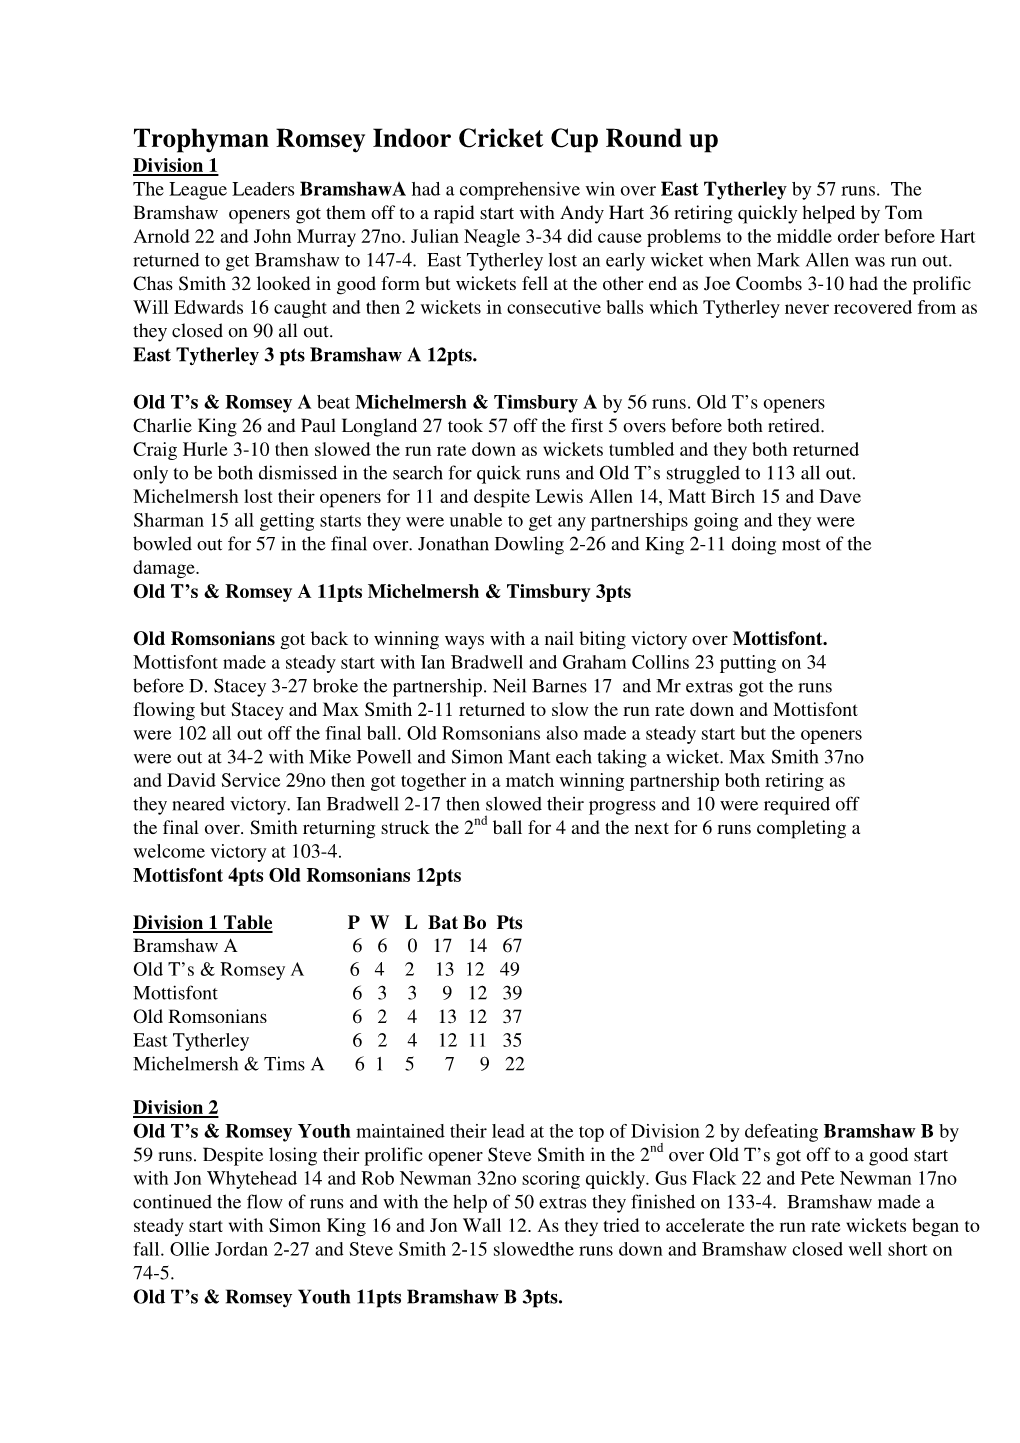 Trophyman Romsey Indoor Cricket Cup Round up Division 1 the League Leaders Bramshawa Had a Comprehensive Win Over East Tytherley by 57 Runs